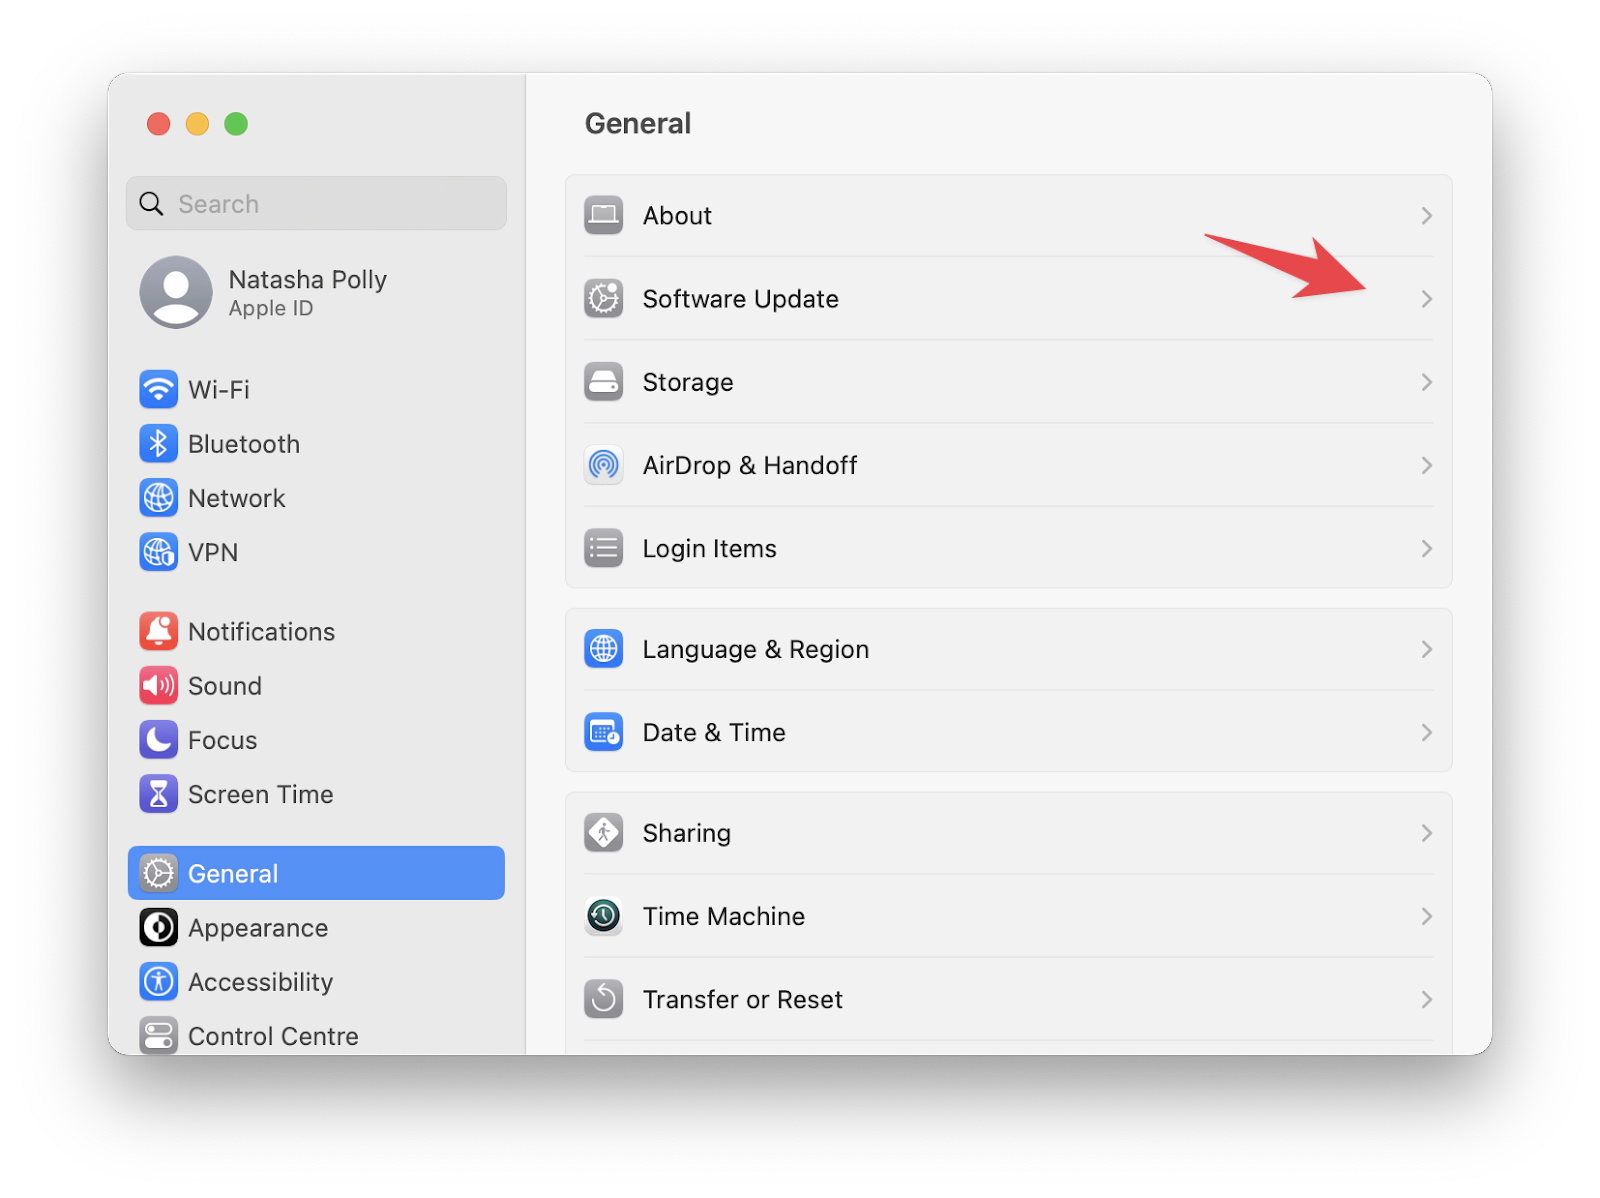 Mac update: How to upgrade macOS the right way